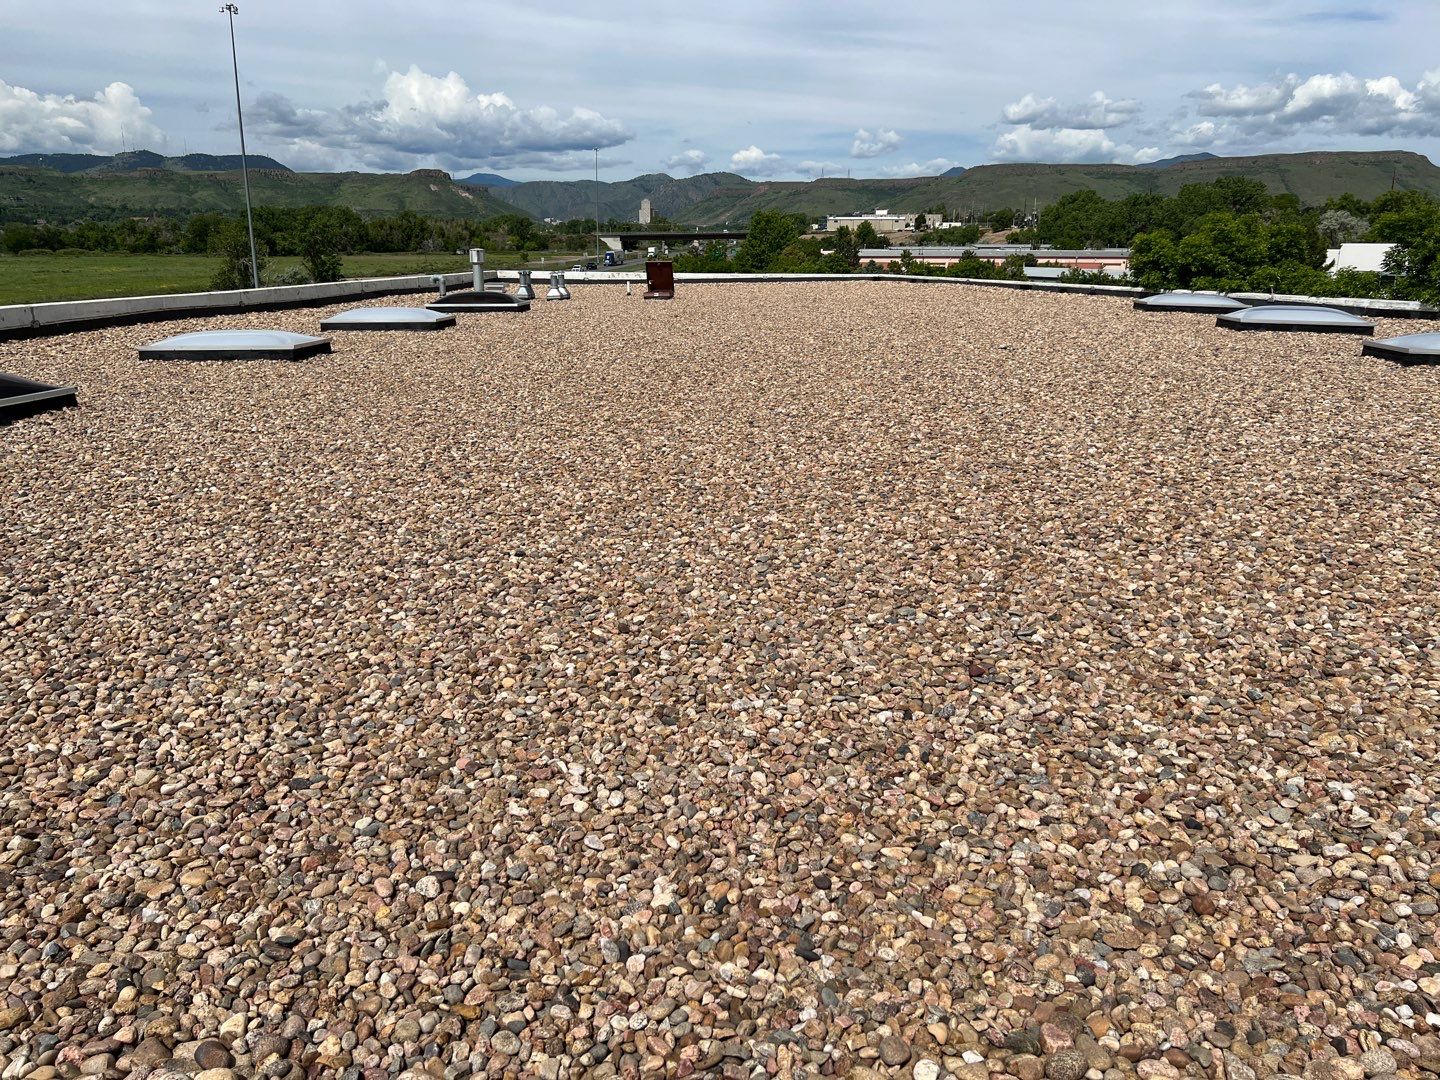 Flat commercial rooftop covered with protective gravel, with skylights and mechanical equipment, set against a backdrop of rolling hills and a cloudy sky, emphasizing the blend of functionality and natural surroundings.